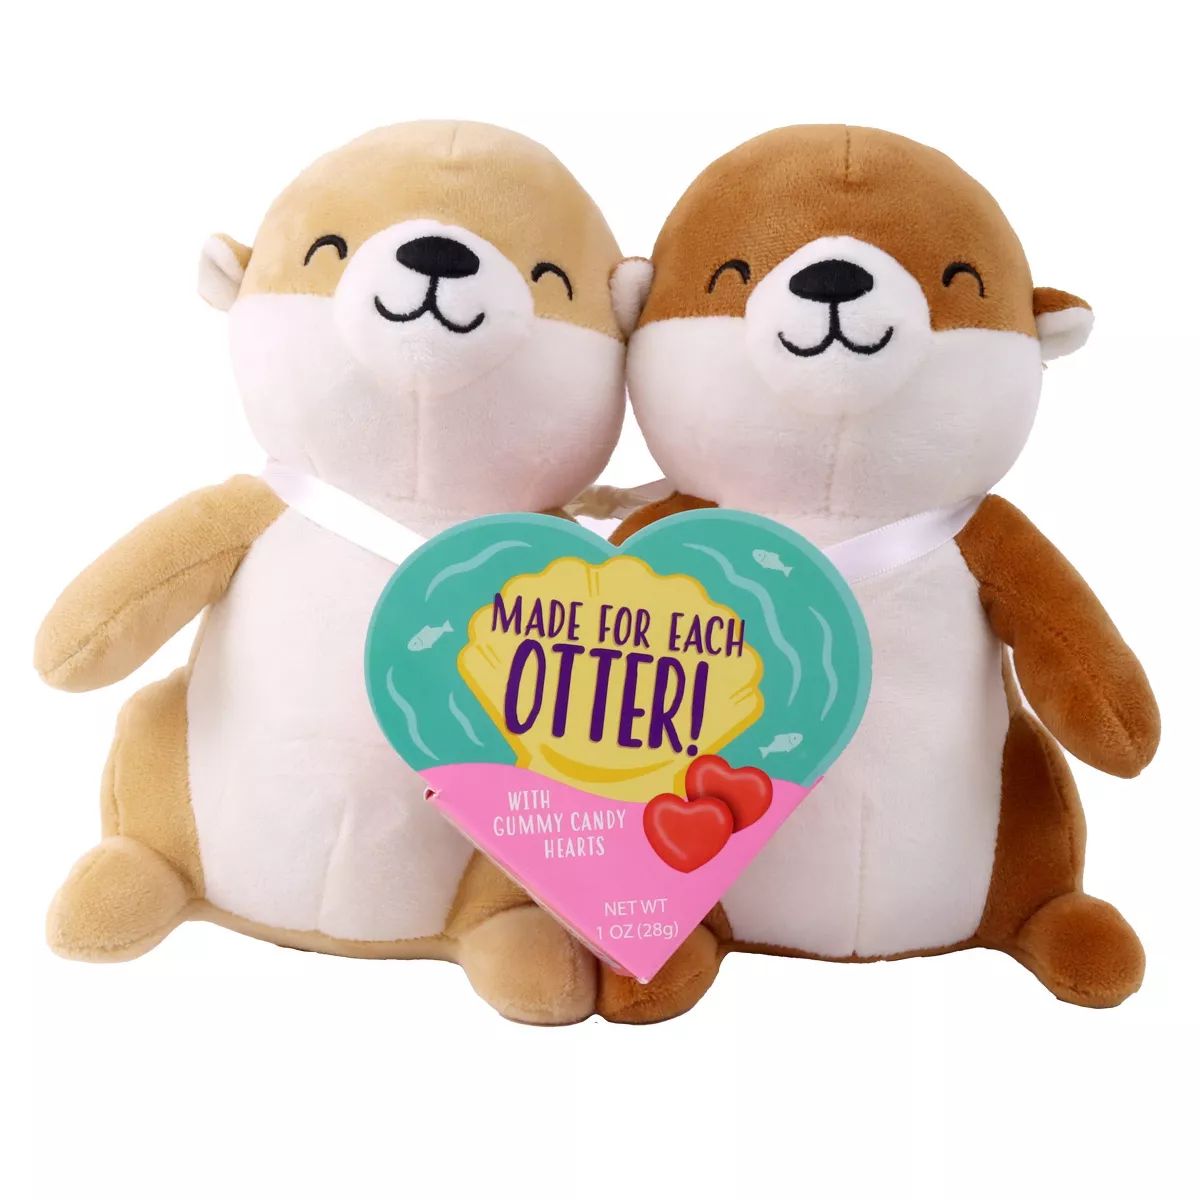 Otter Date Night Plush Valentine's with Gummy Candy Hearts - 1oz | Target